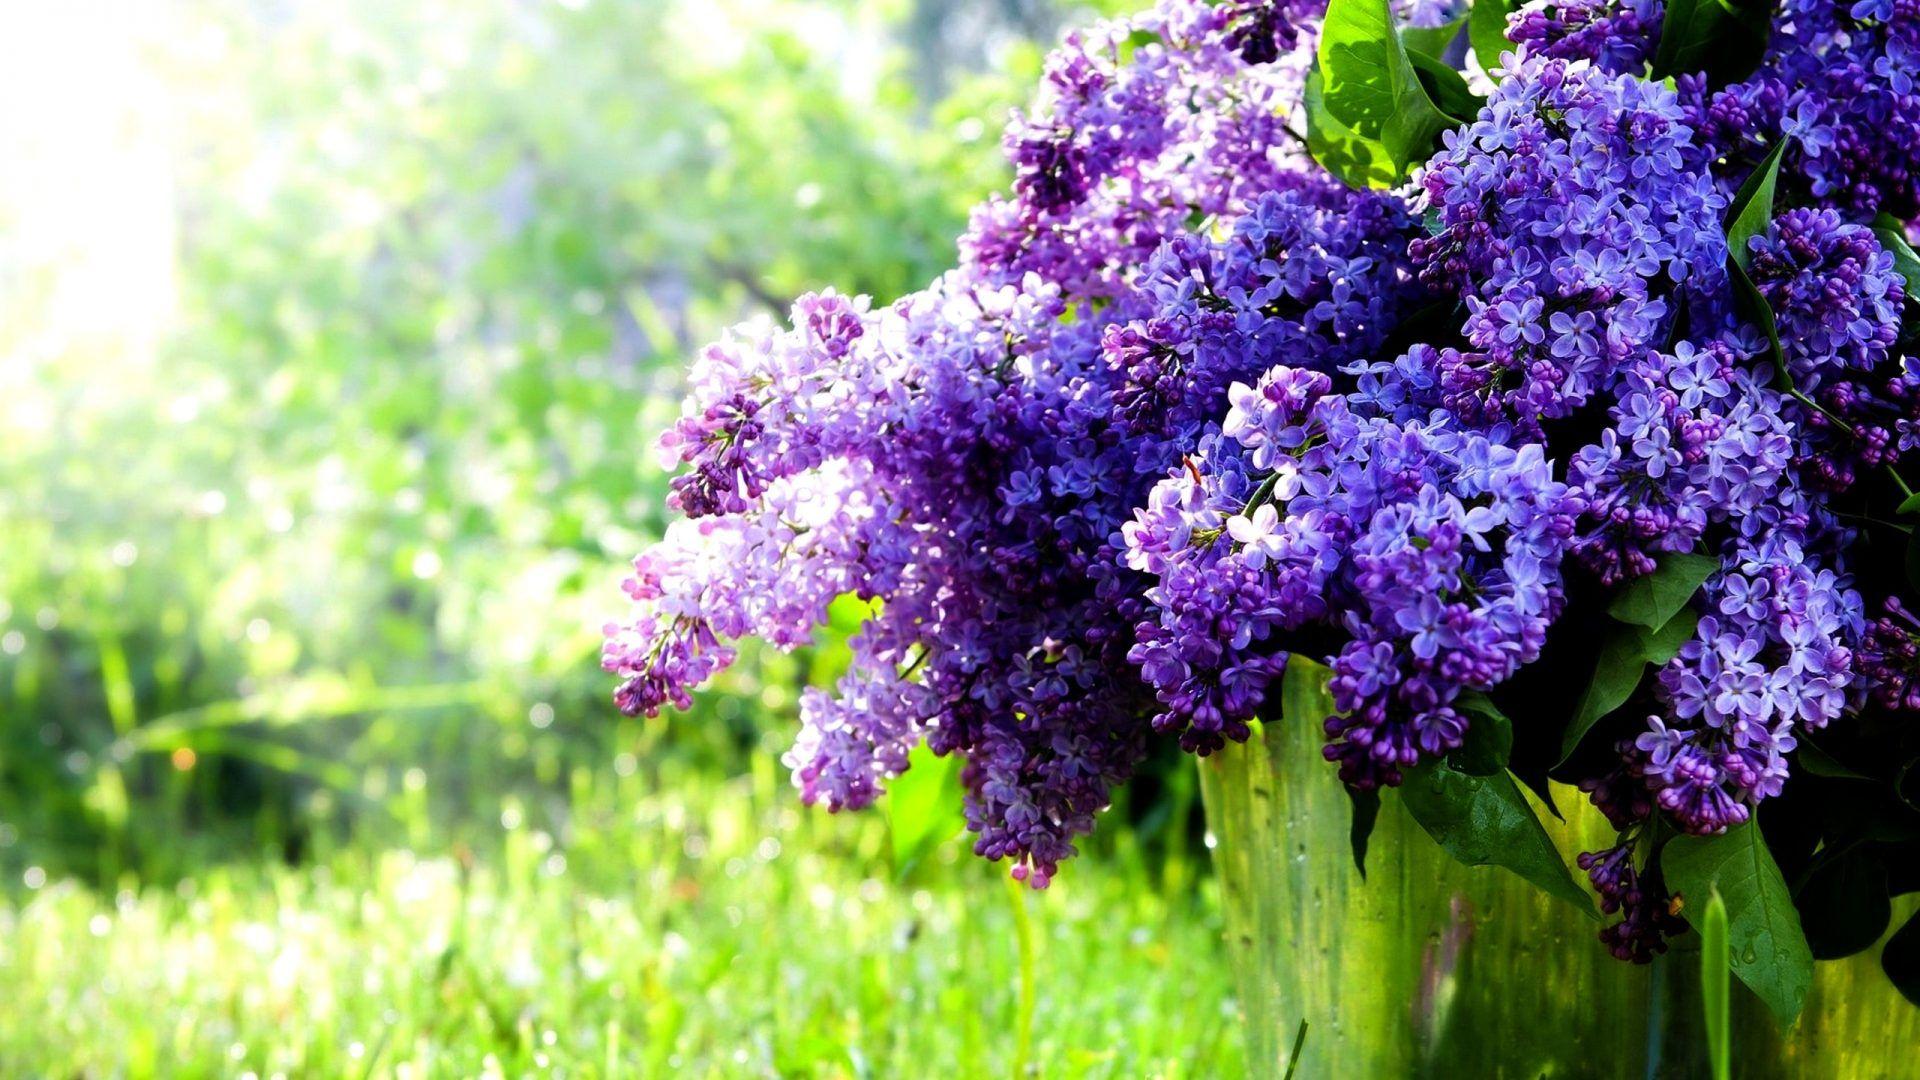 Lilac Tag wallpaper: Lilac Flowers Large Garden